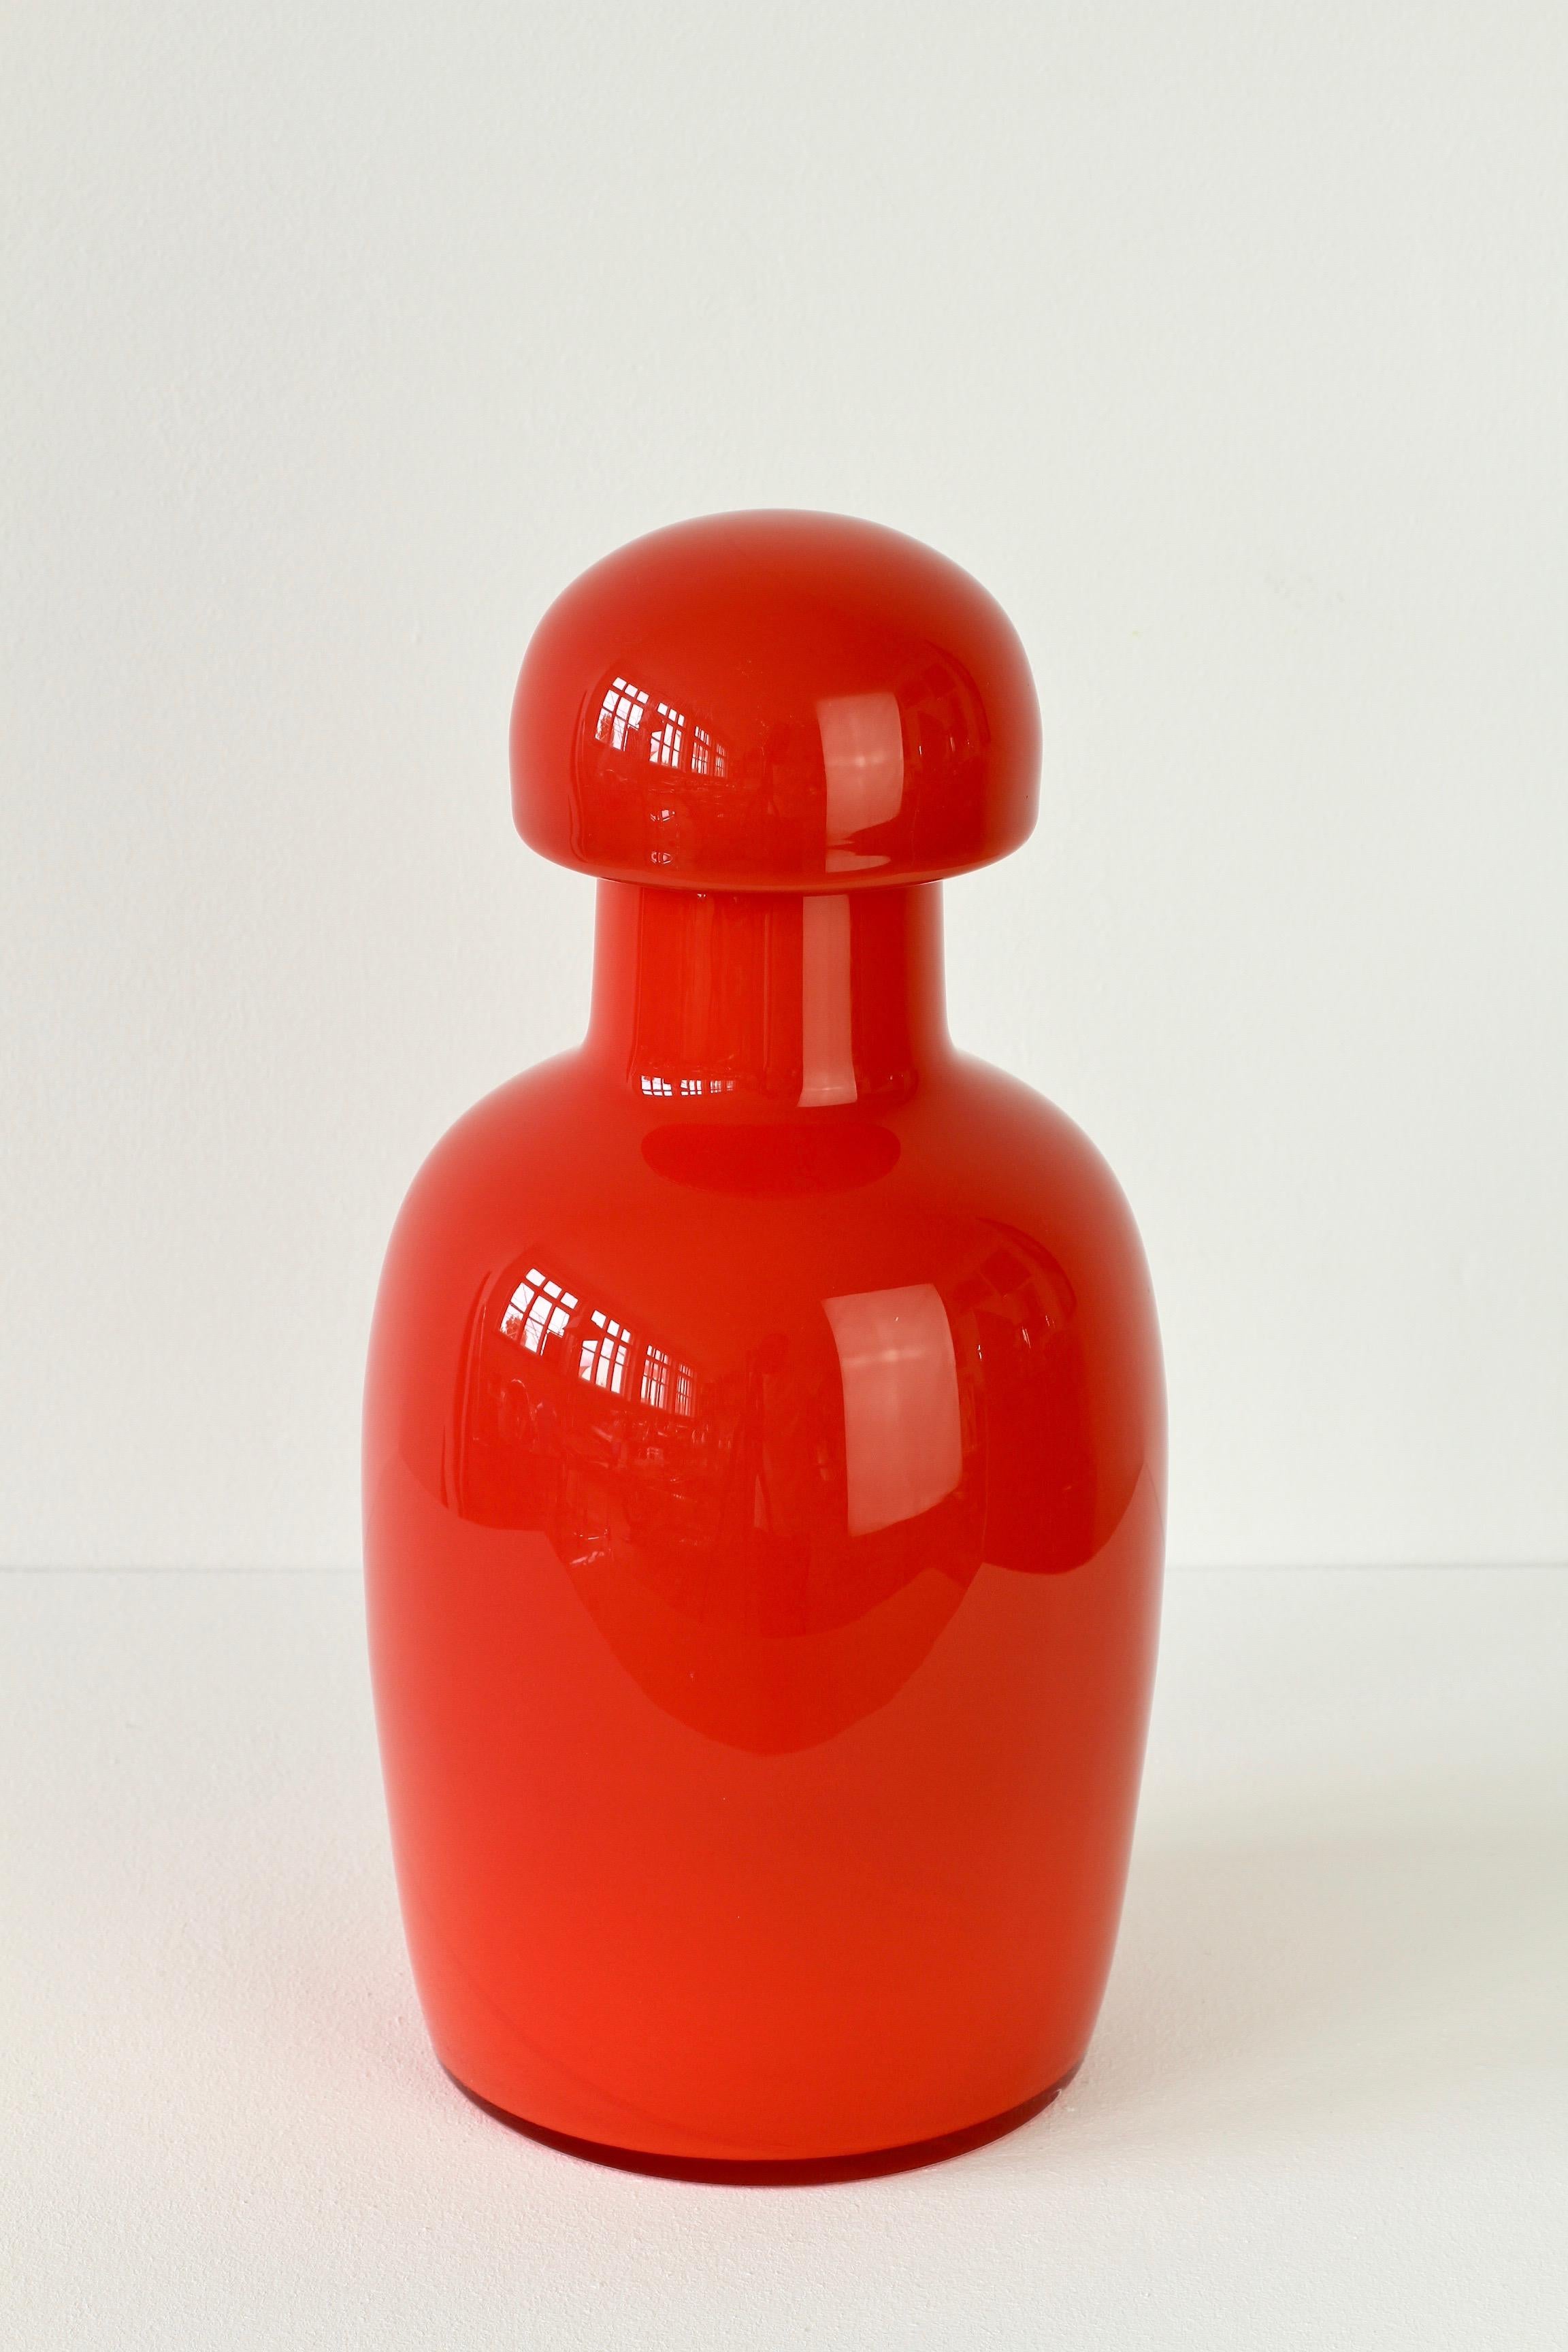 Wonderful tall bright red Italian vintage midcentury urn with lid by Cenedese Vetri of Murano, Italy. A fun, funky and bright way to add a touch of bold color / color to your interior, imagine glass like this on open, white shelving in a kitchen,